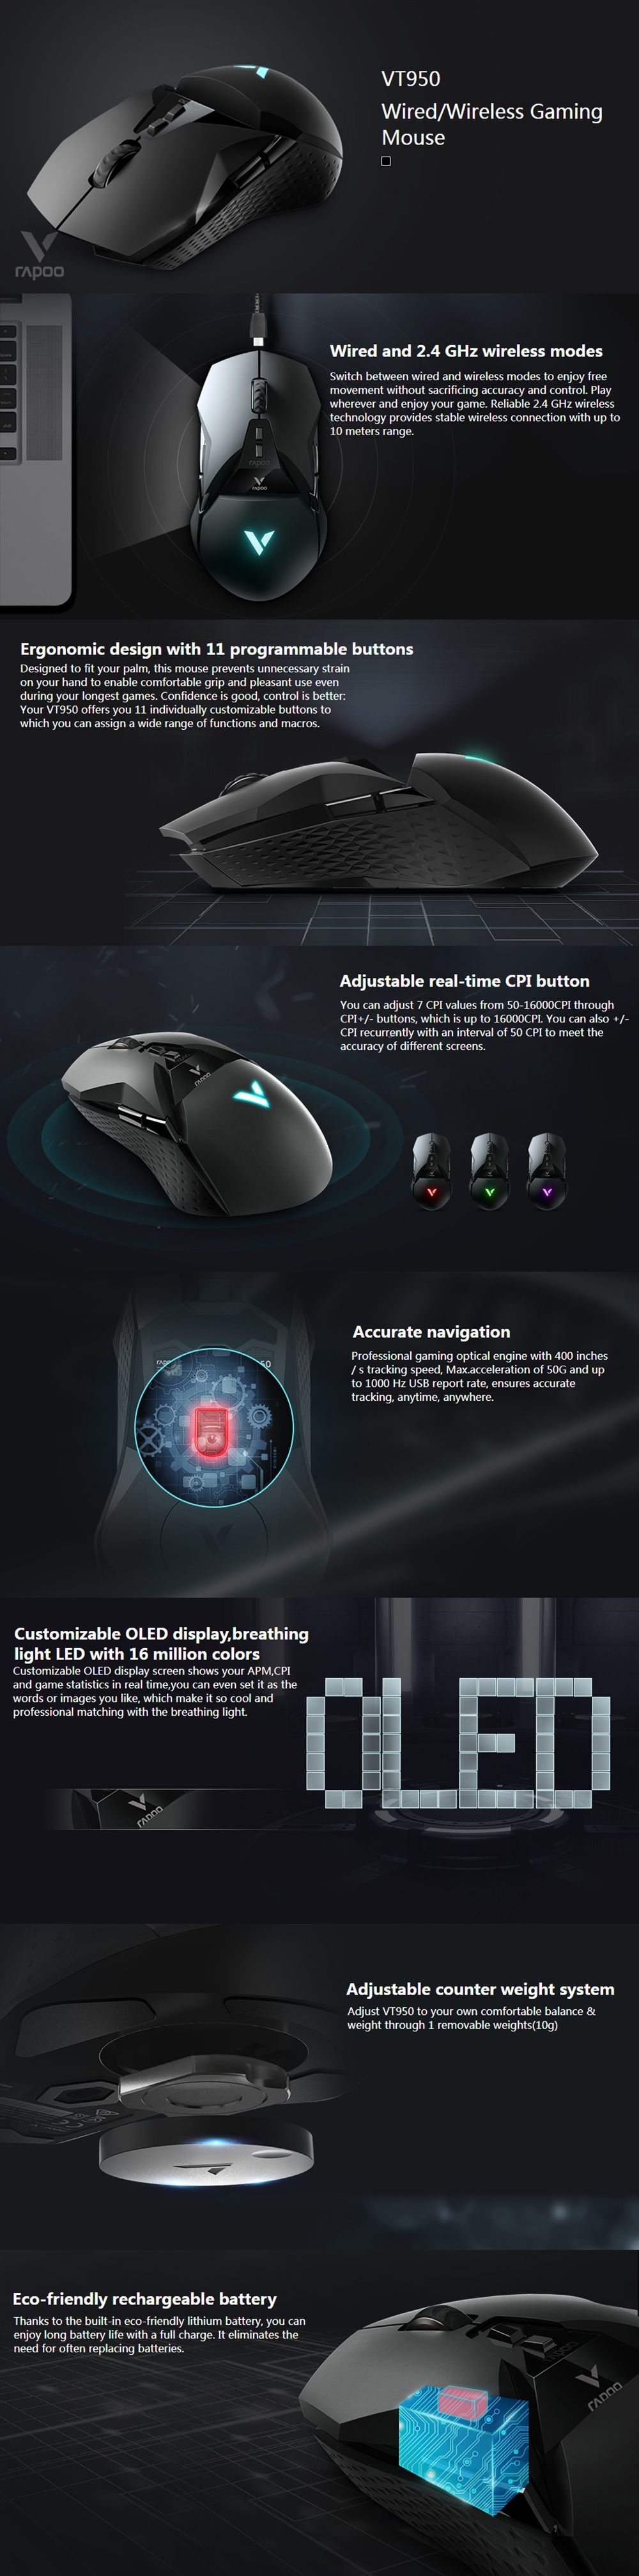 Rapoo-VT950-Gaming-Mouse-Wired--24G-Wireless-Rechargeable-Mouse-16000DPI-7-Buttons-Optical-Gaming-Mo-1728514